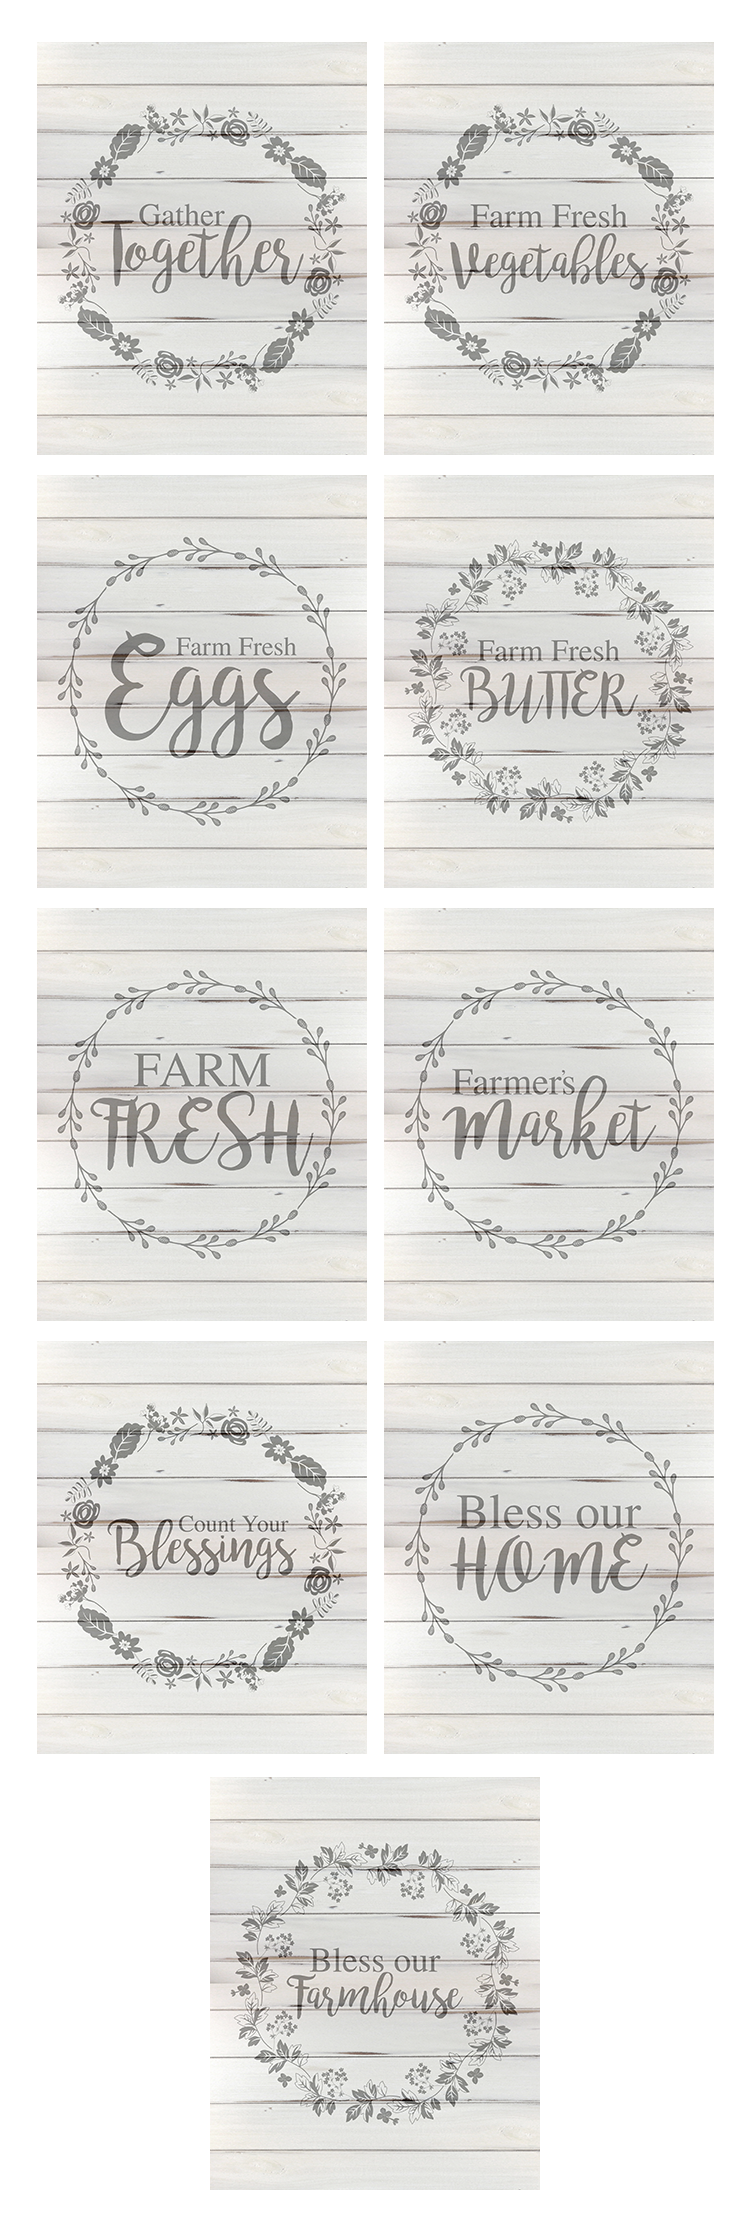 Loving these free farmhouse printables for any room in the house!